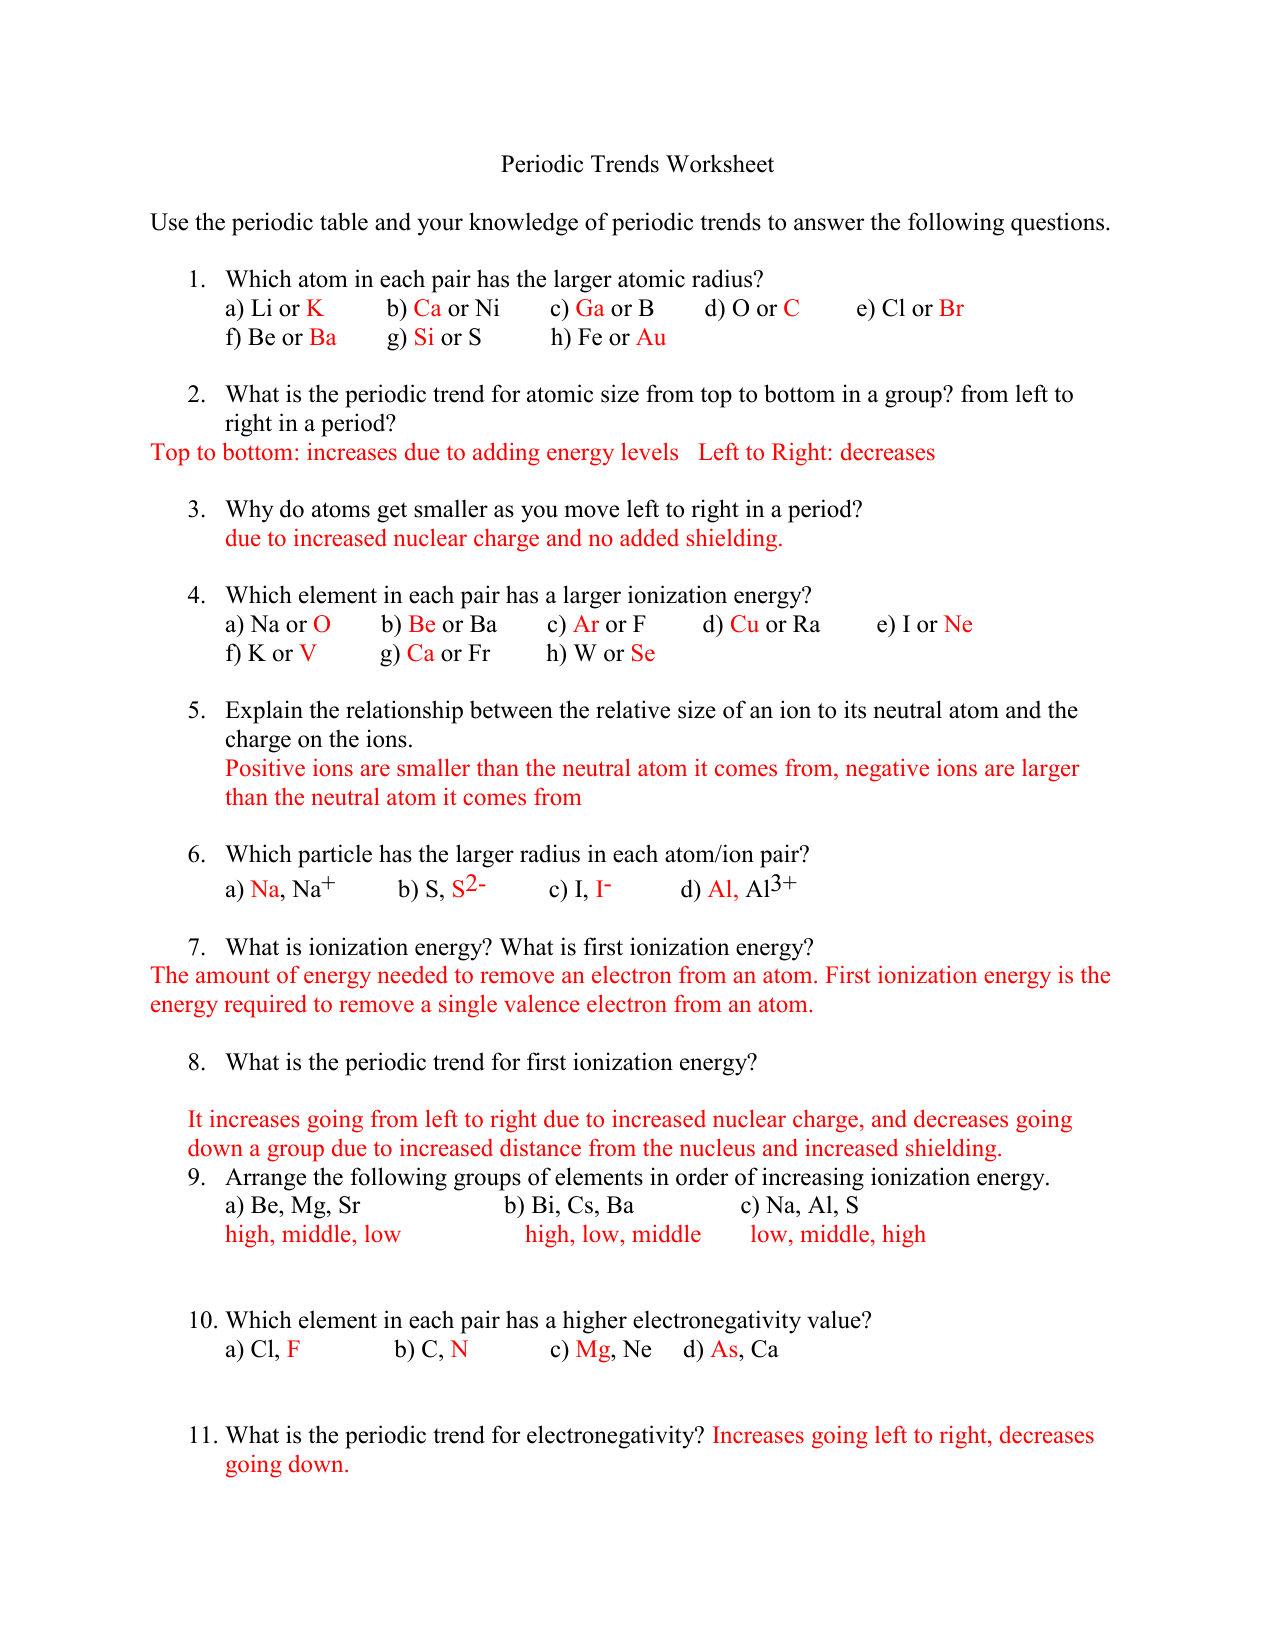 Periodic Trends Worksheet 11 answers For Periodic Trends Worksheet Answers